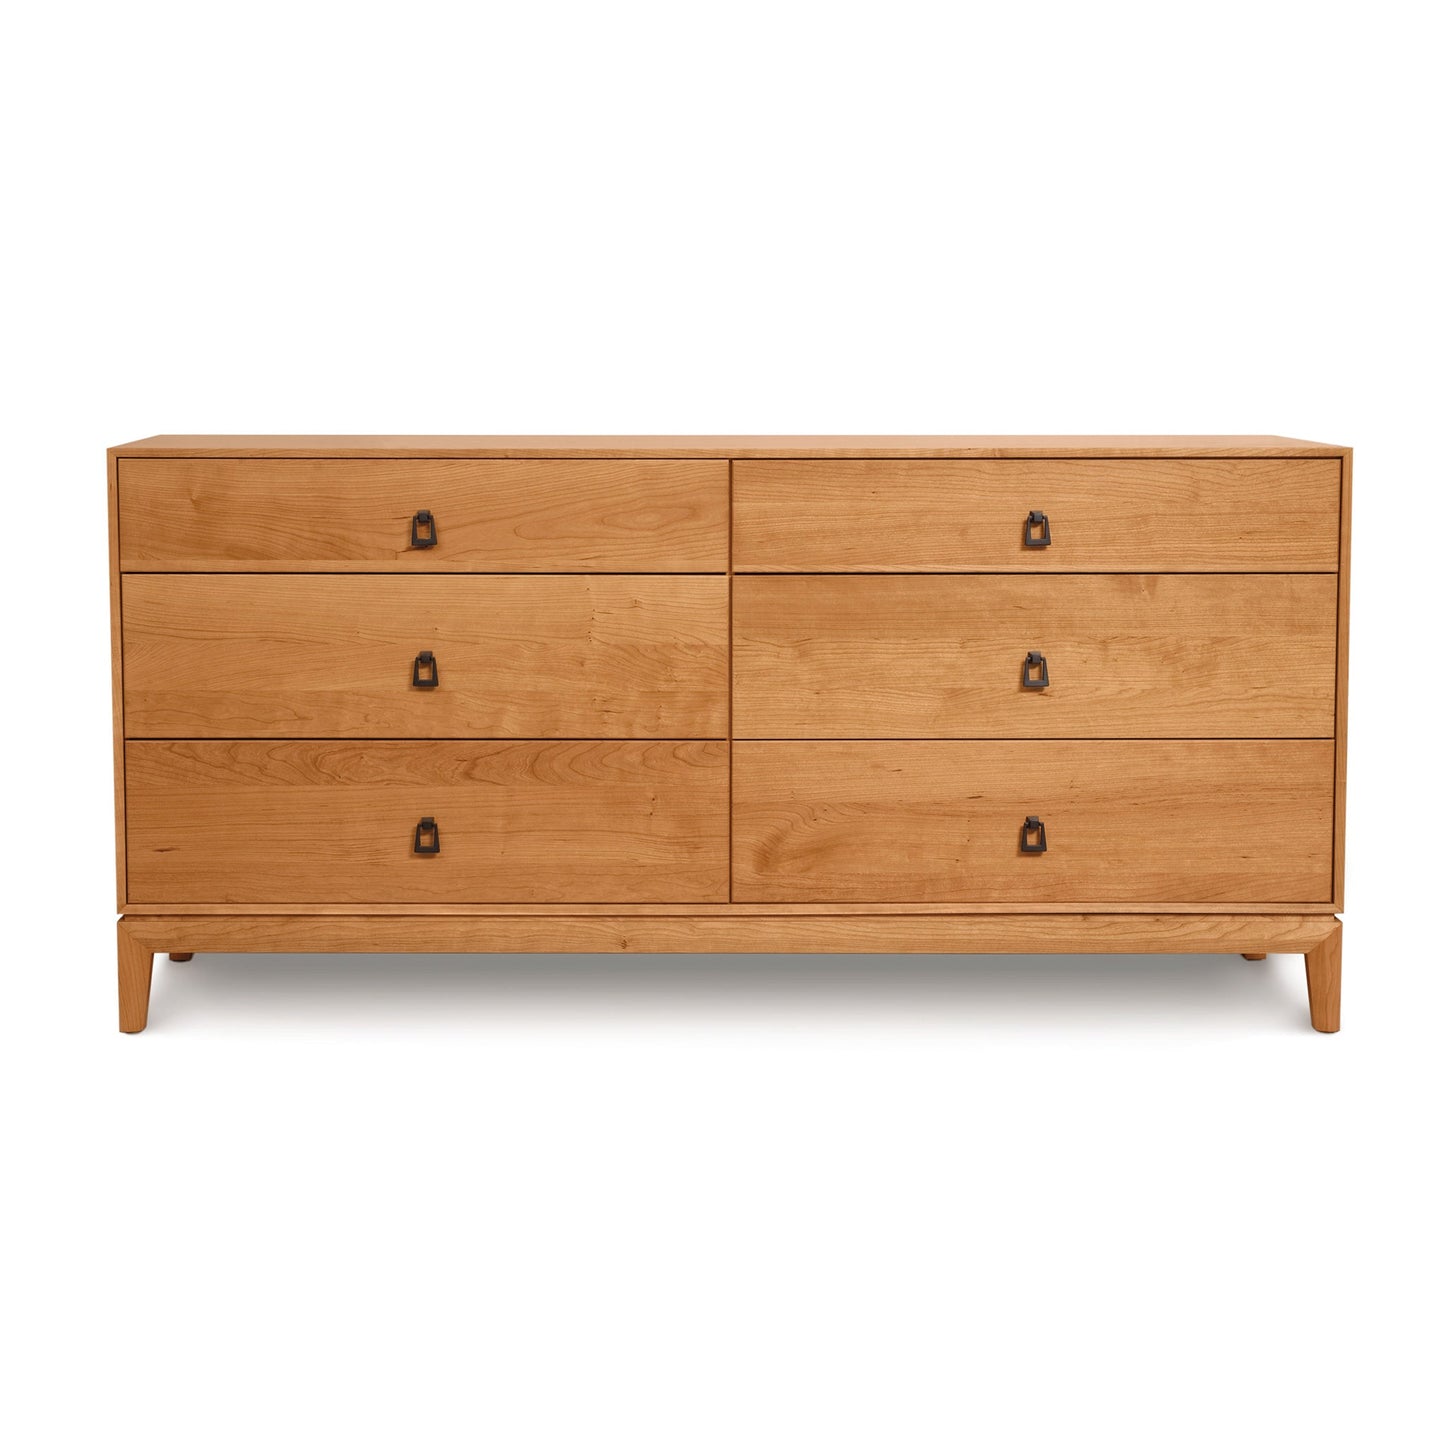 A wooden dresser with four drawers on a white background.